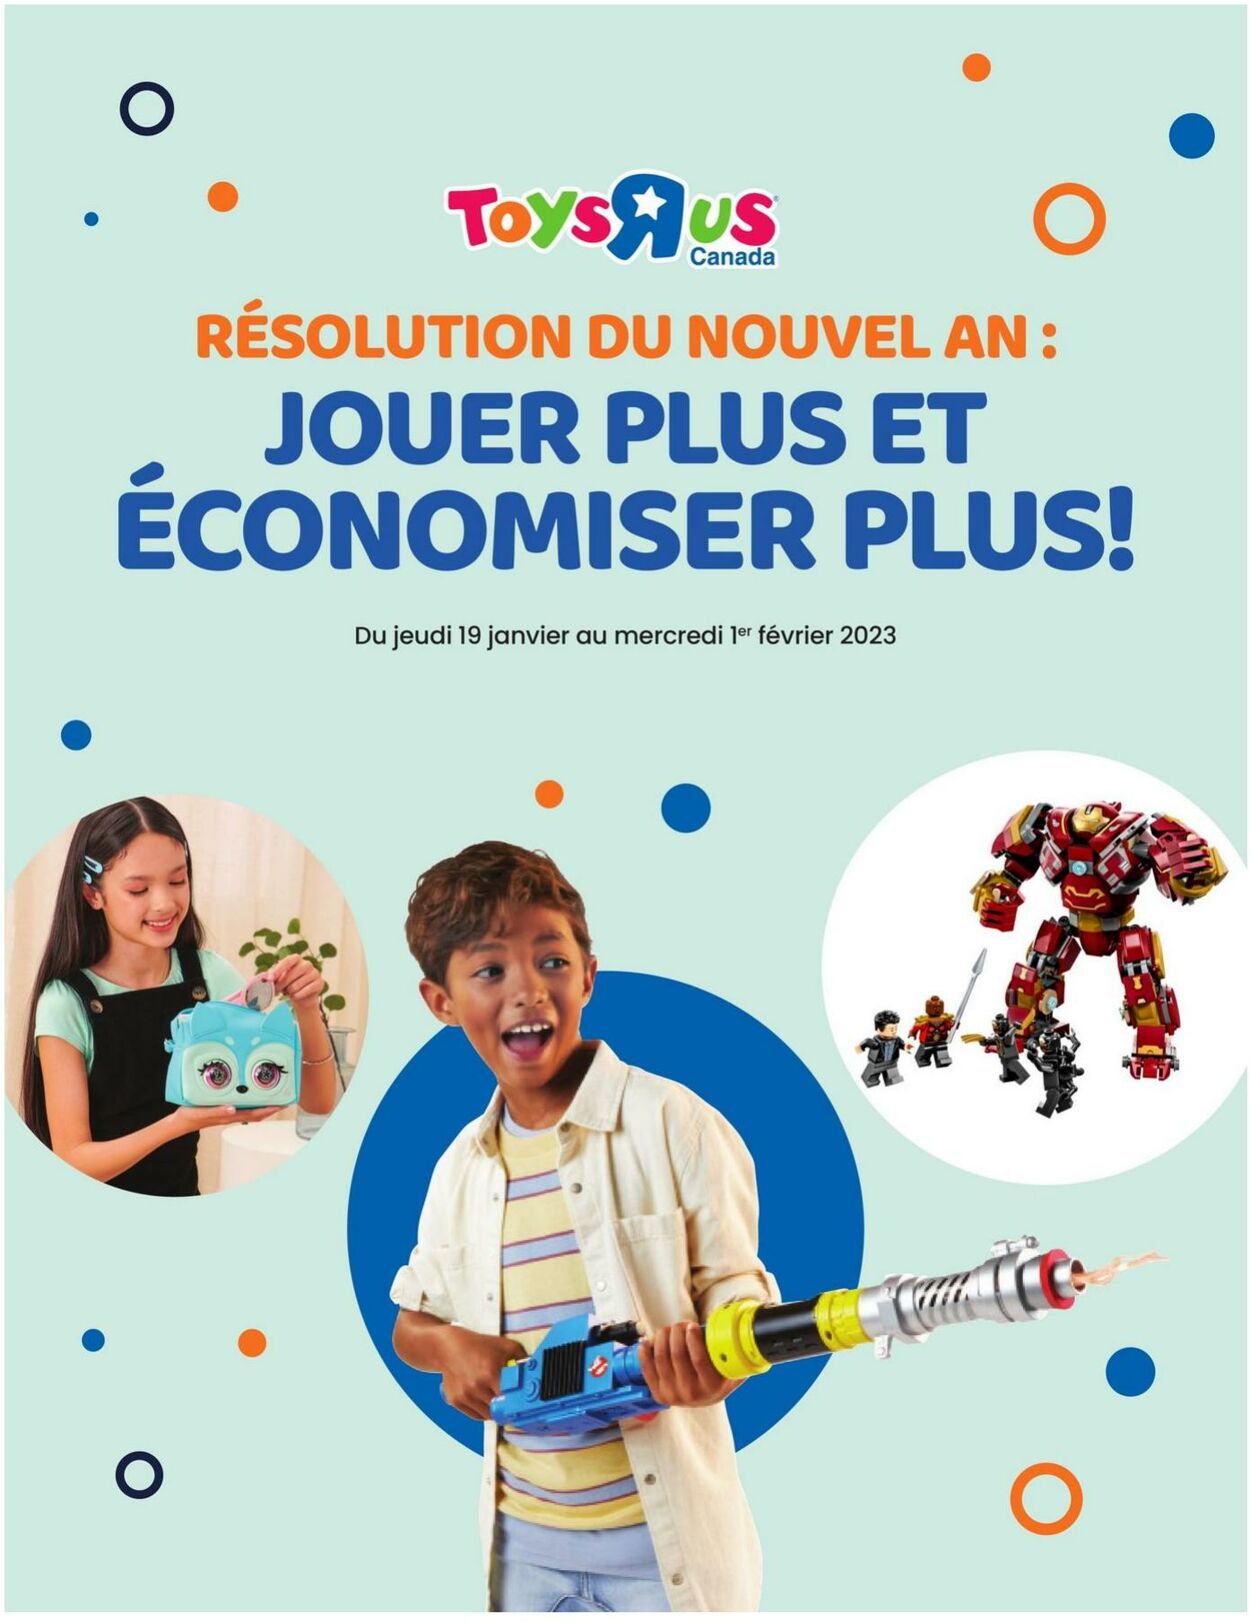 Toys’R’Us Circulaires